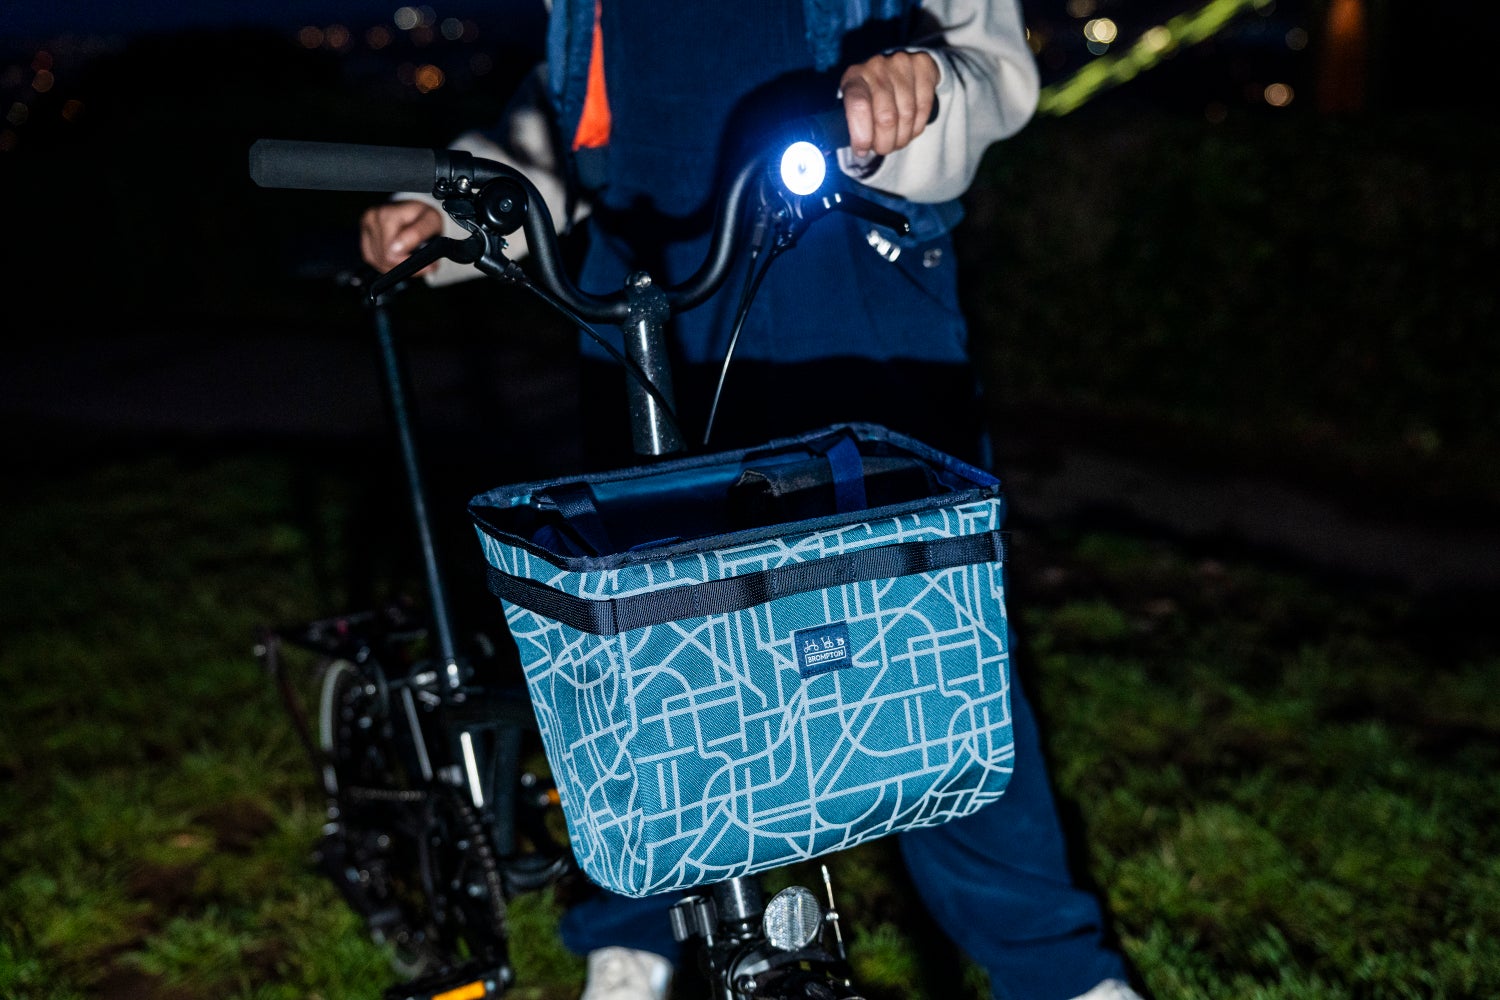 A nighttime shot of the Brompton Bright Nights luggage collection attached to the front of a Brompton folding bike